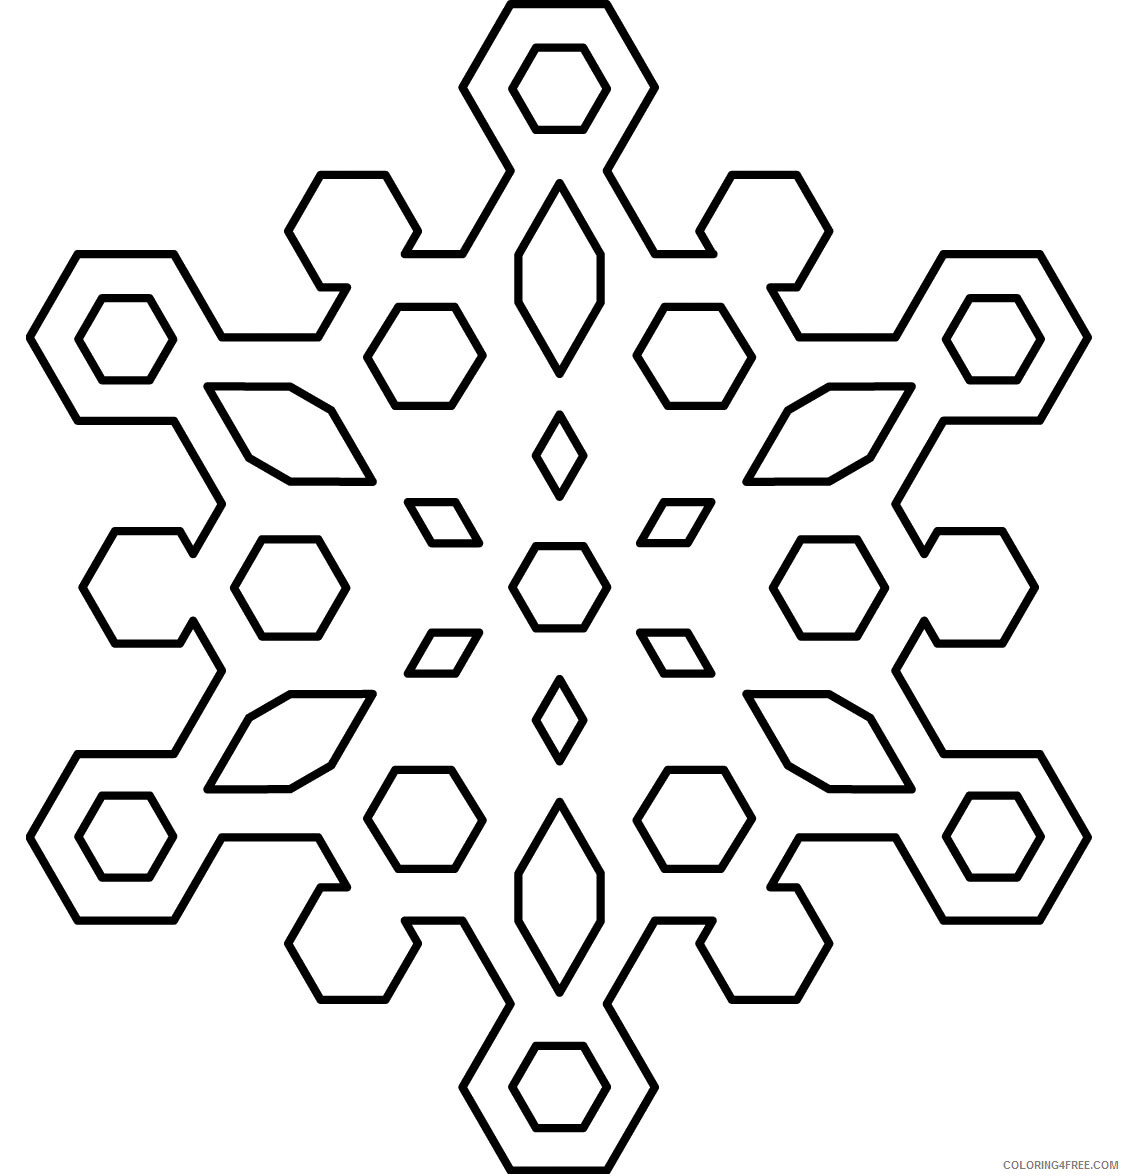 Snowflake Coloring Pages of Snowflakes Printable 2021 5487 Coloring4free